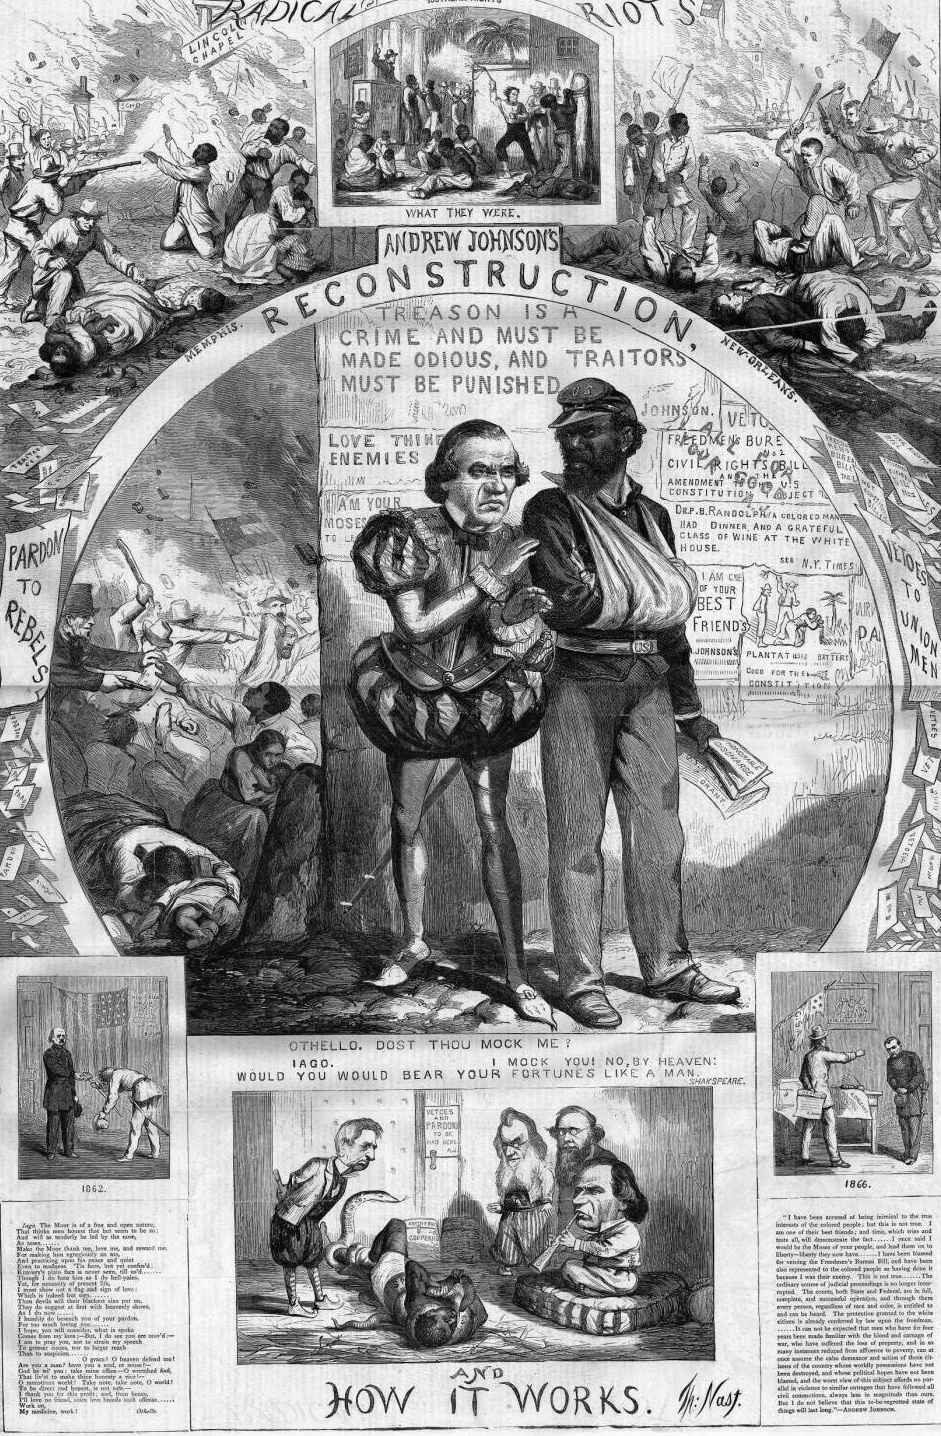 "Reconstruction and How It Works," in Harper's Weekly shows President Johnson as Iago and a black soldier as Othello, drawing a parallel between Iago's manipulative treatment of Othello with Johnson's behavior during Reconstruction. The image also shows Reconstruction riots in smaller images surrounding the central image, and includes some text from Othello and quotes from Johnson.